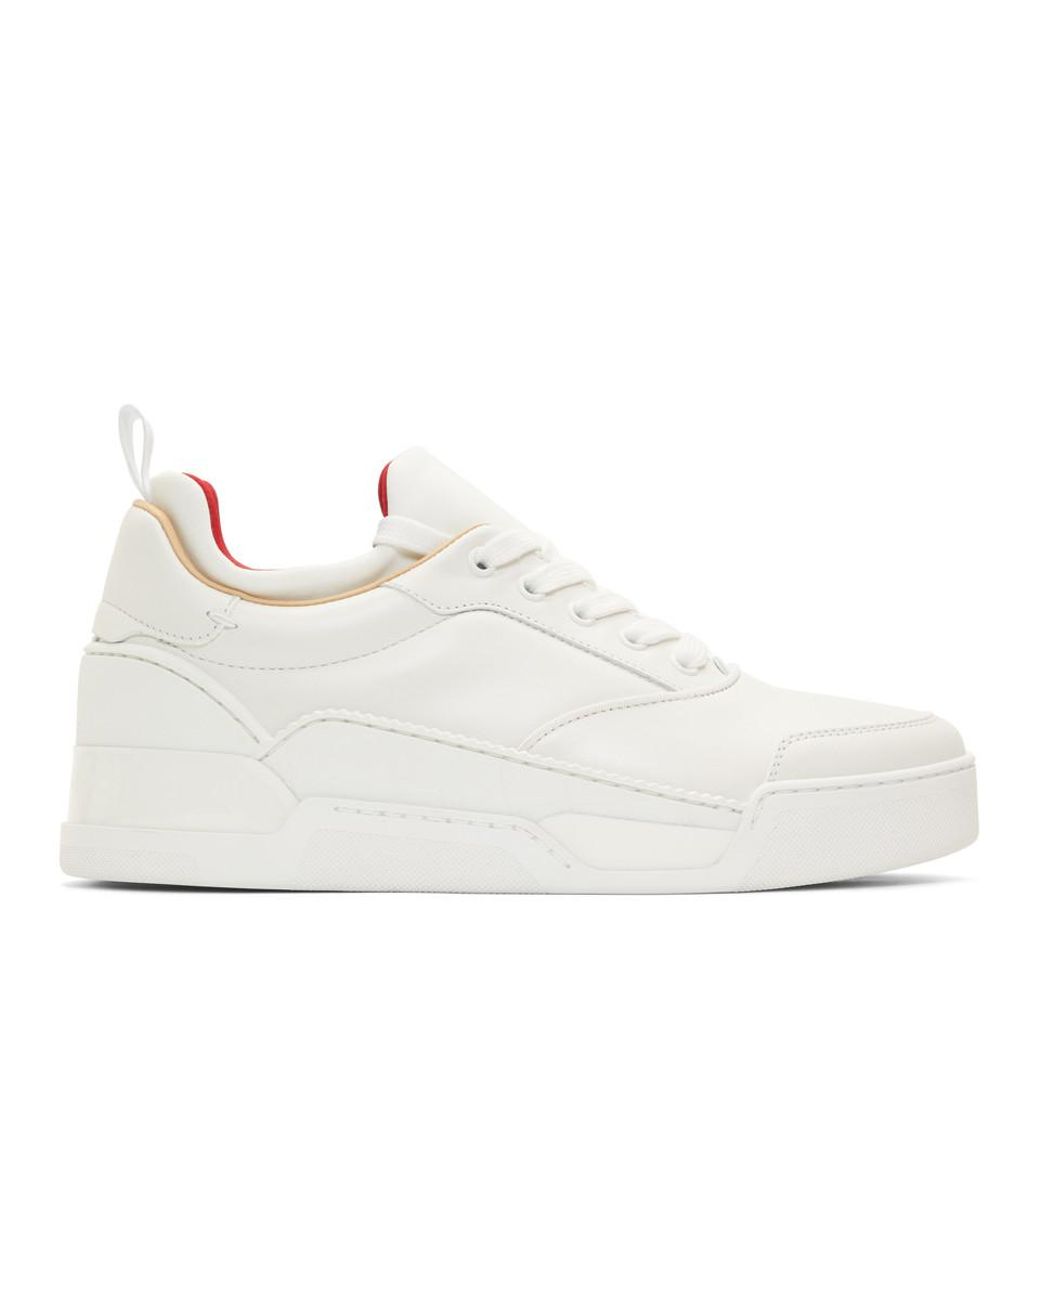 Christian Louboutin - Authenticated Aurelien Trainer - Cloth White Plain for Men, Never Worn, with Tag